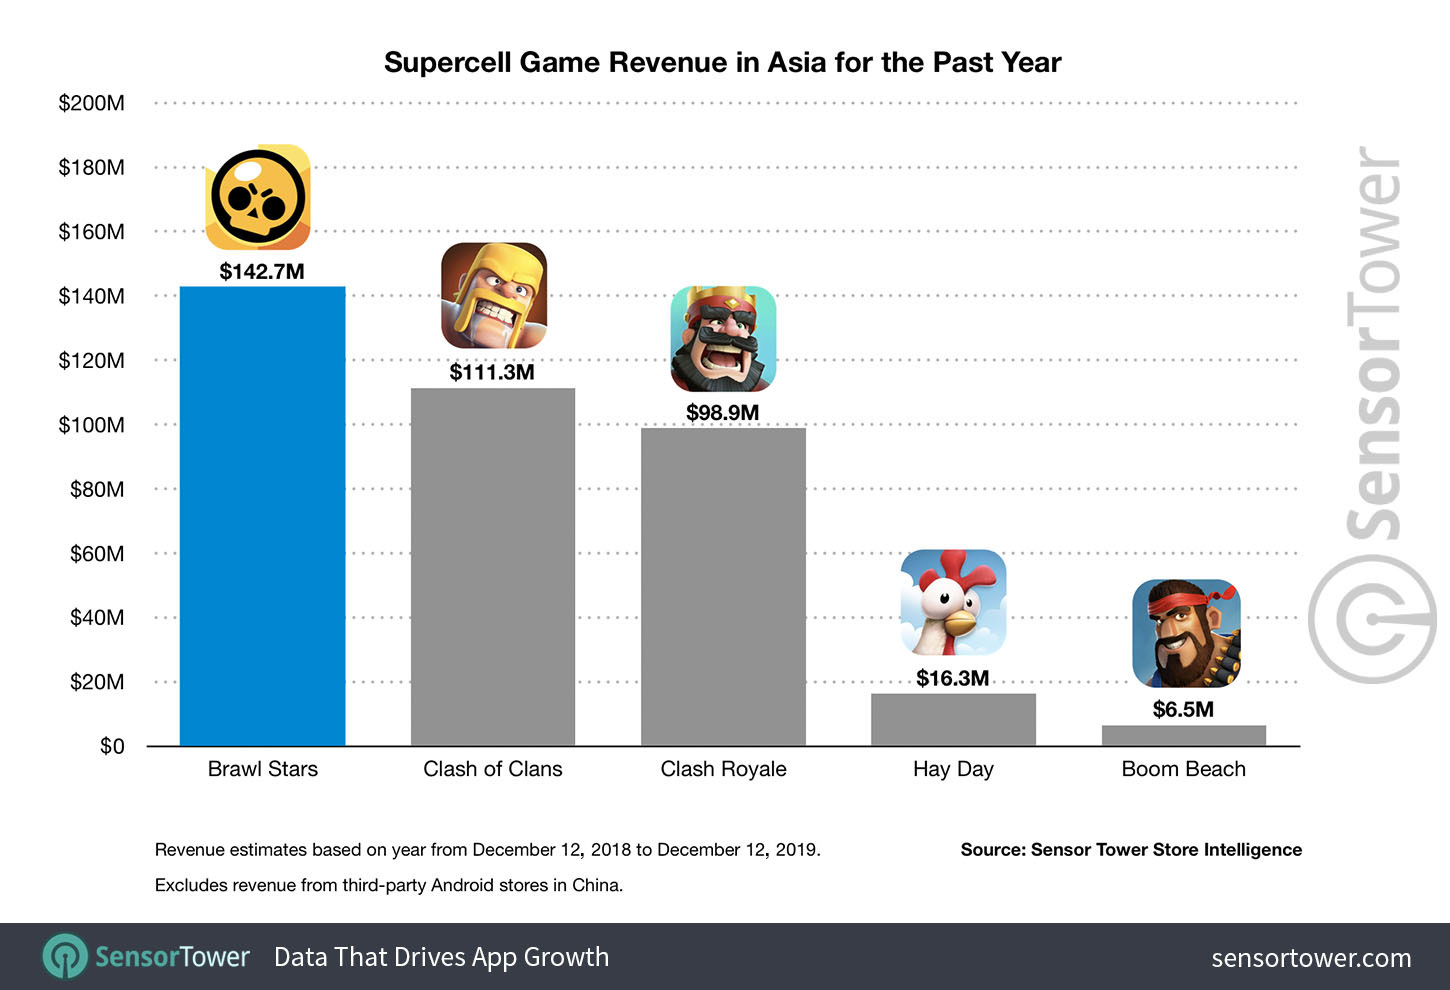 How Brawl Stars Compares to Past Supercell Soft Launches—By One